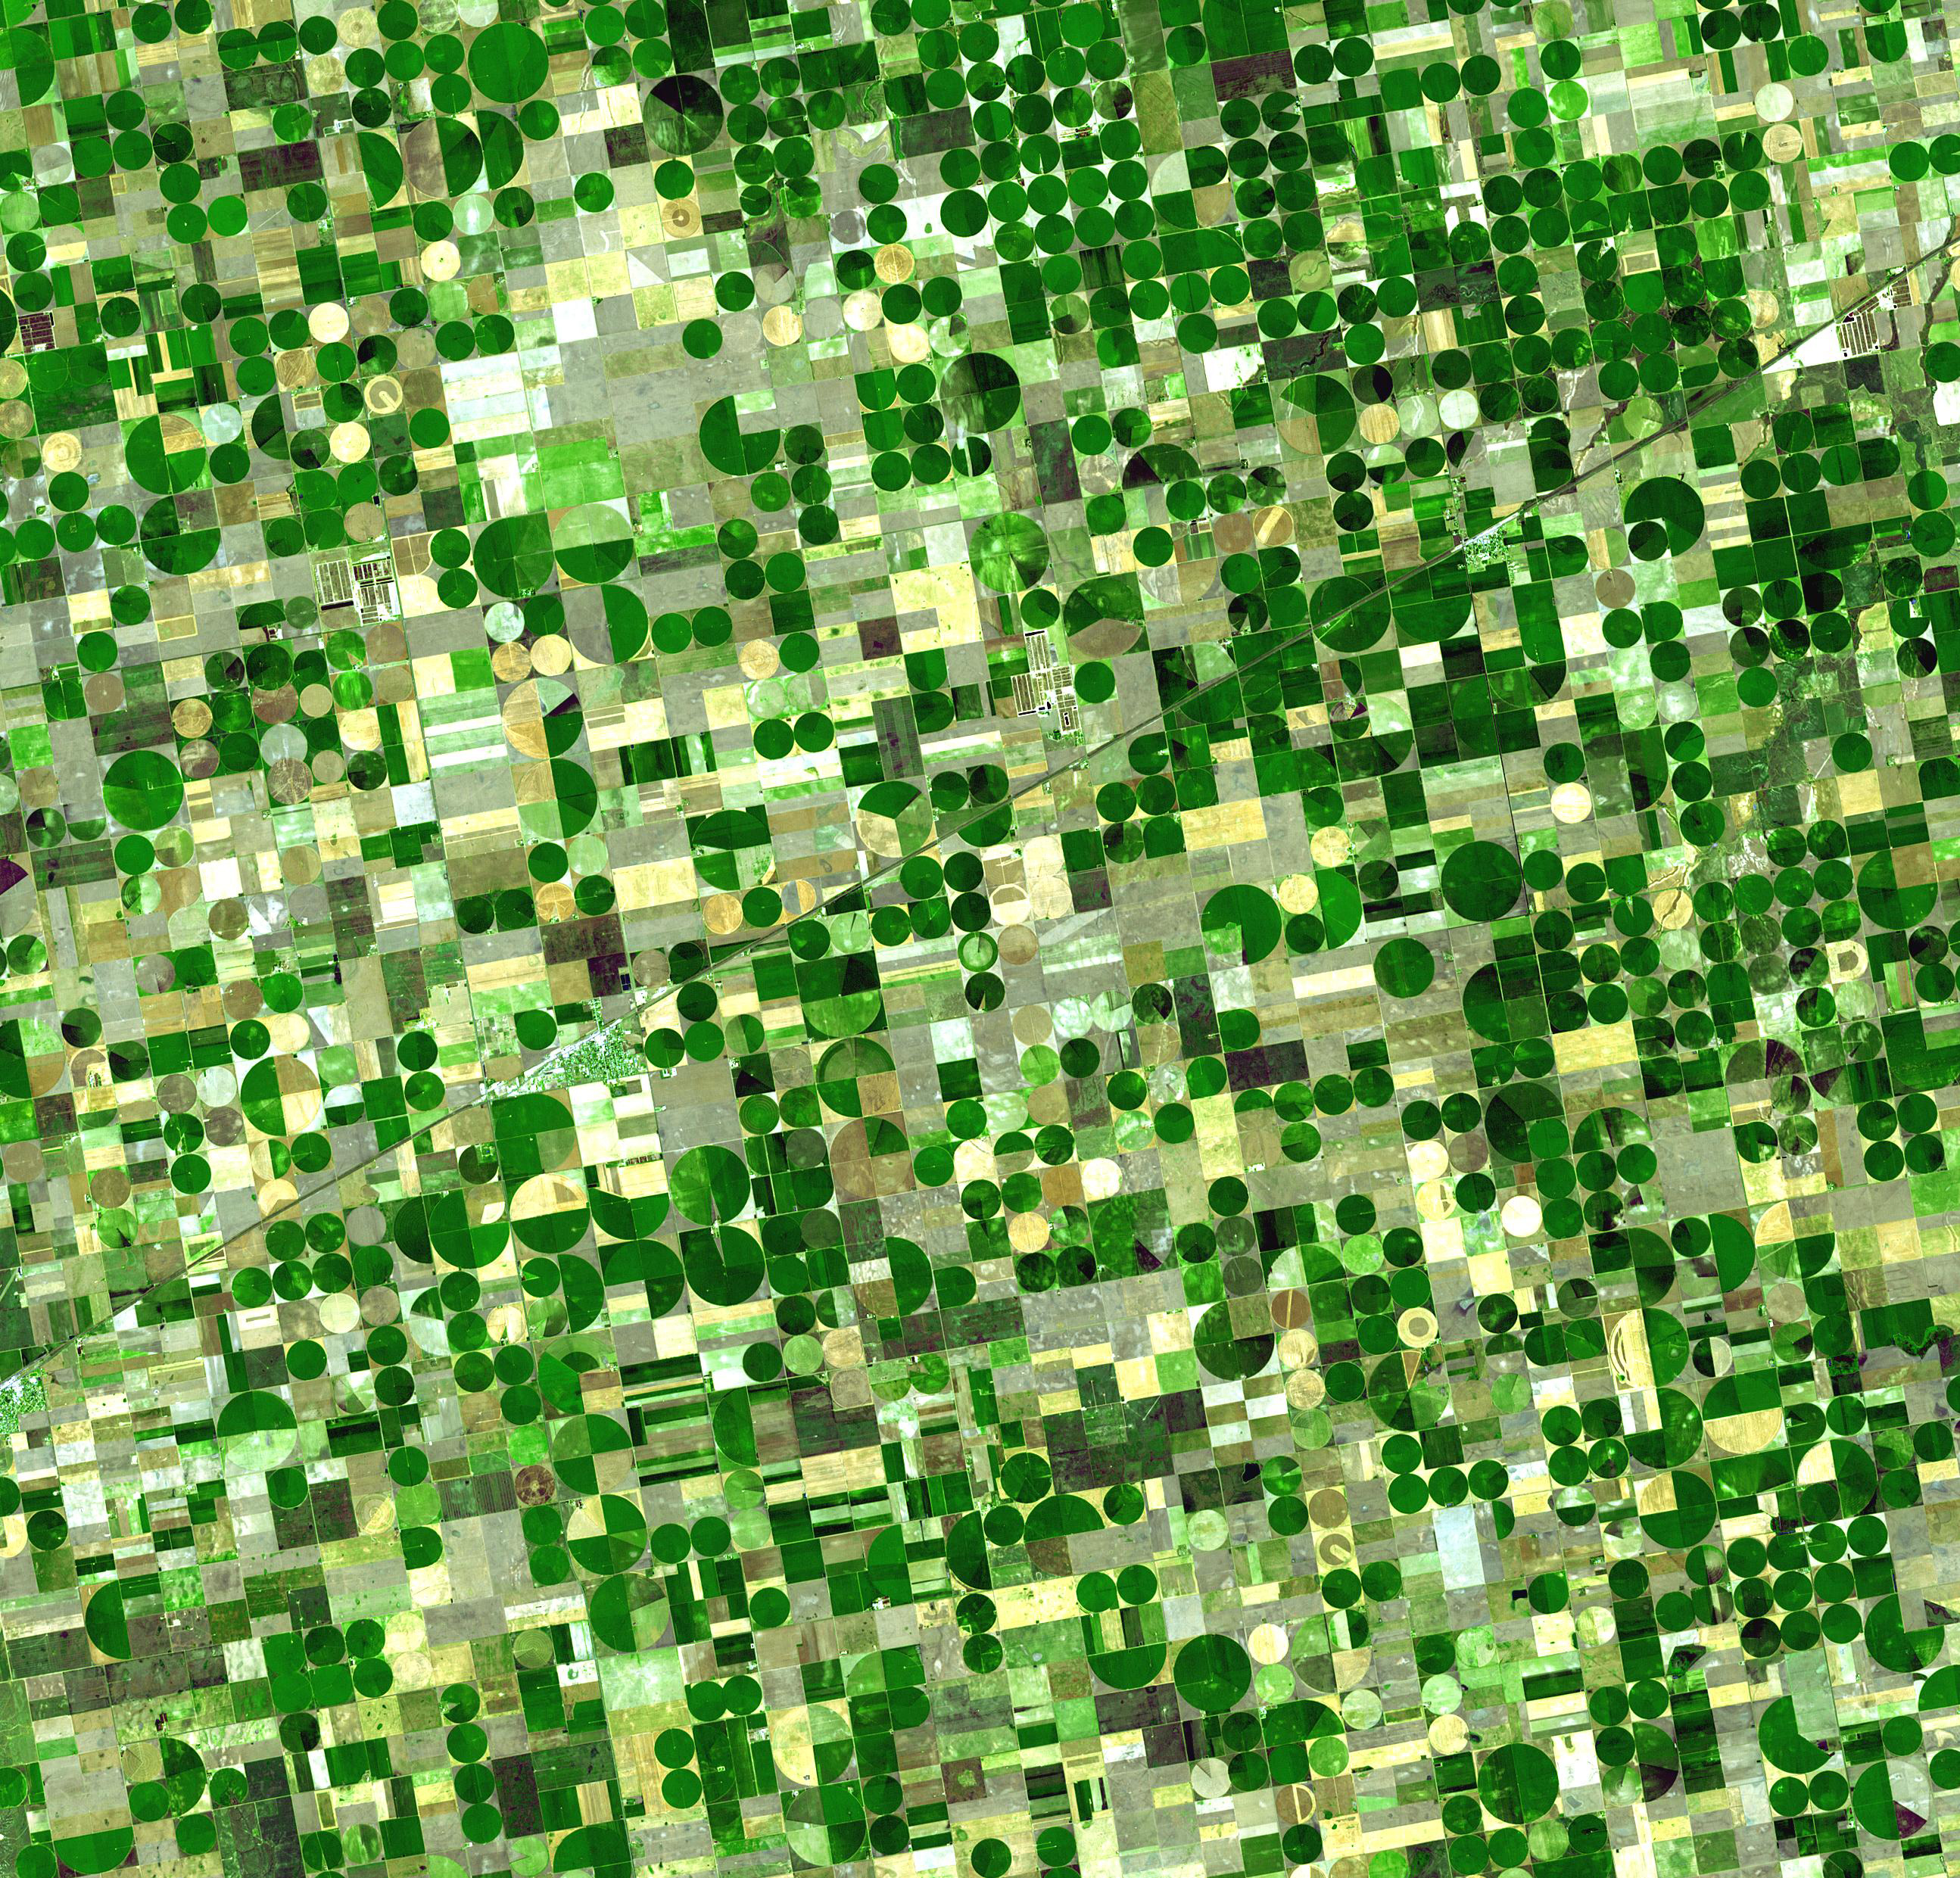 satellite view of farmland plots in shades of green